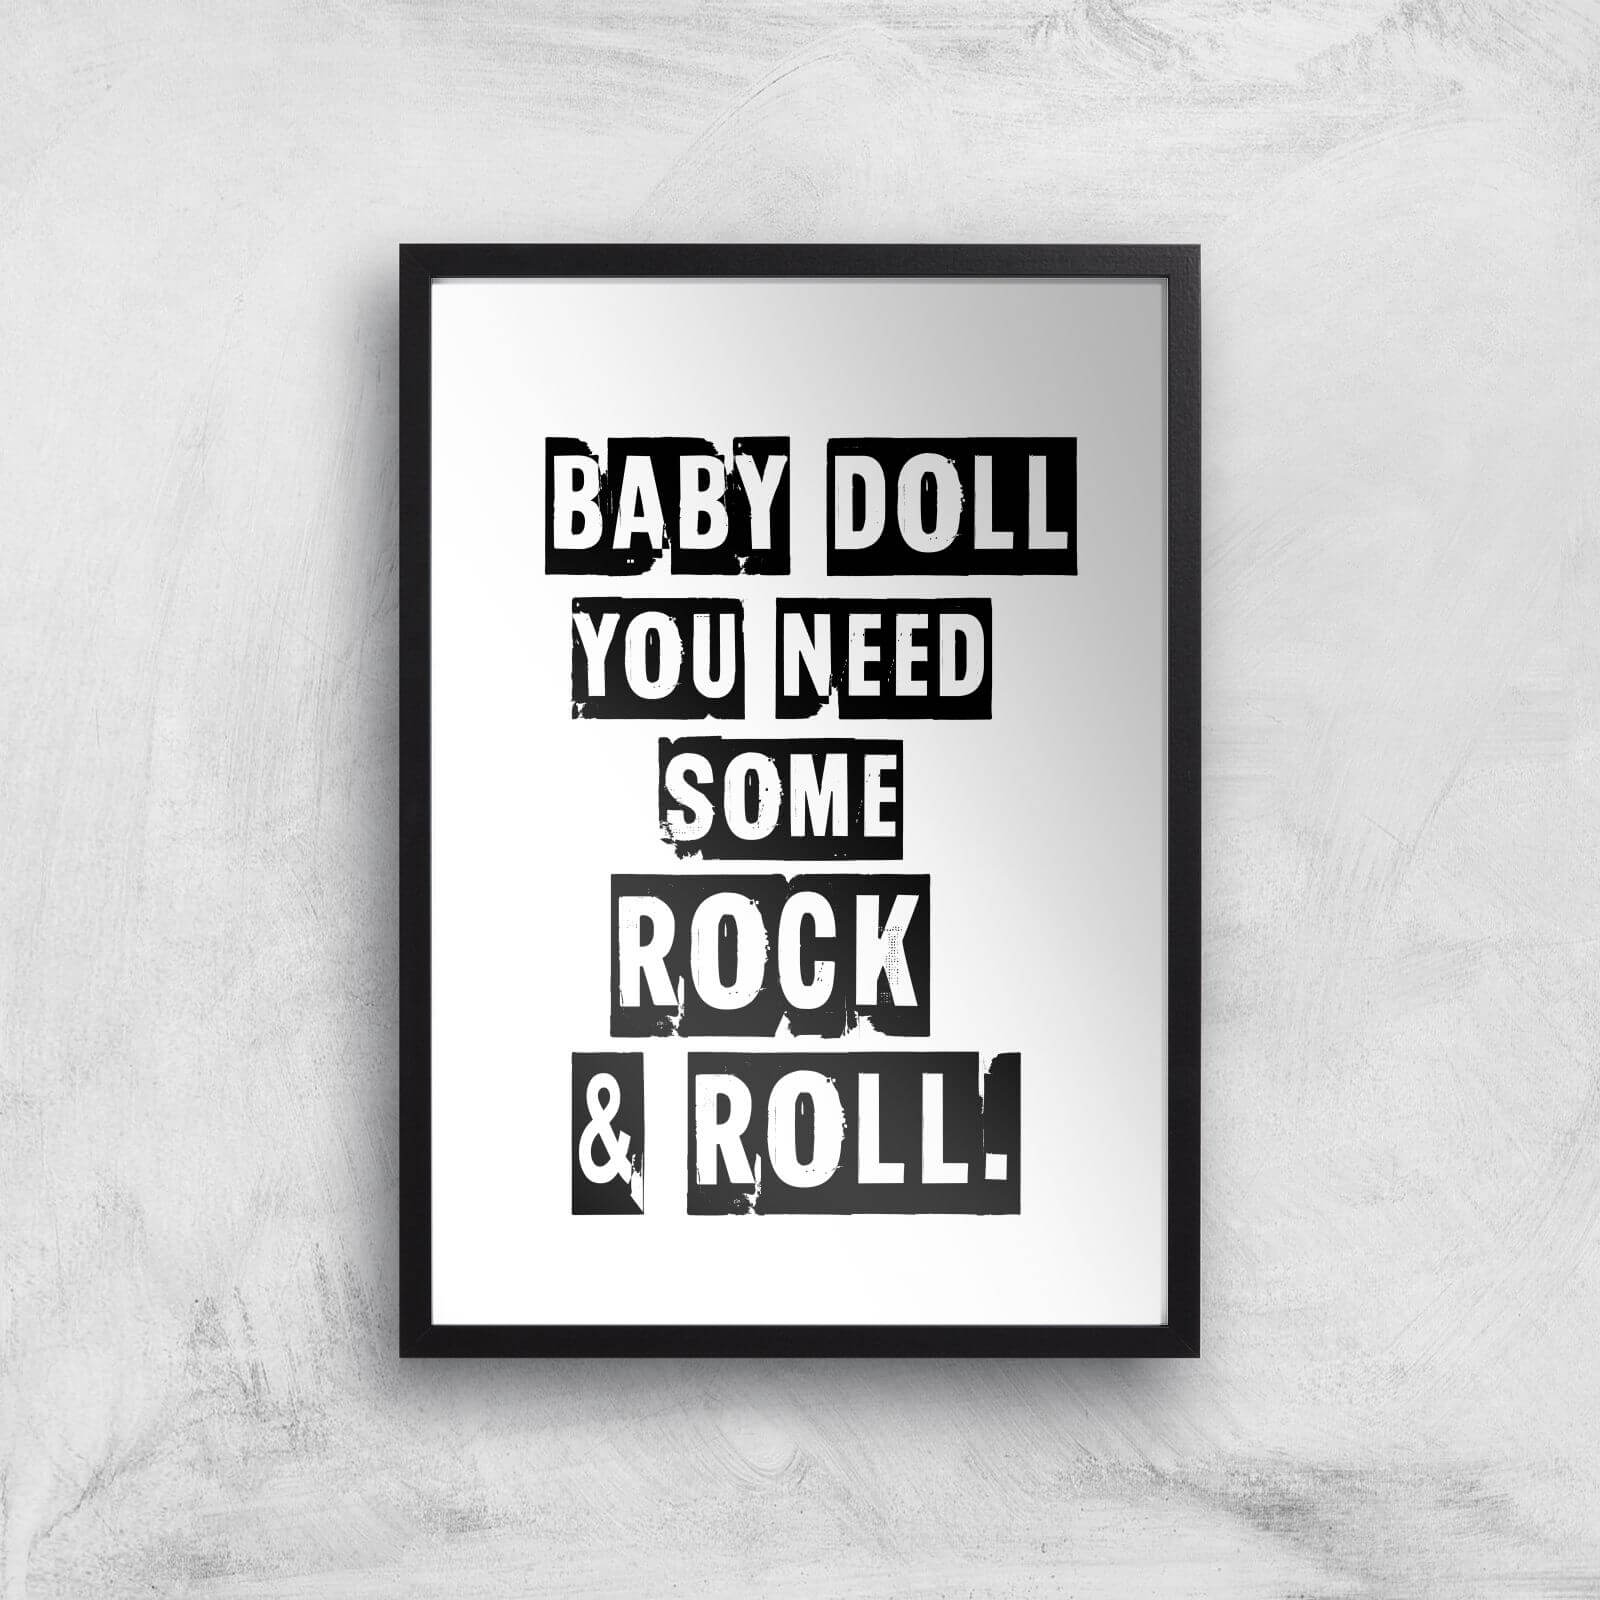 Baby Doll You Need Some Rock & Roll Giclee Art Print - A3 - Black Frame